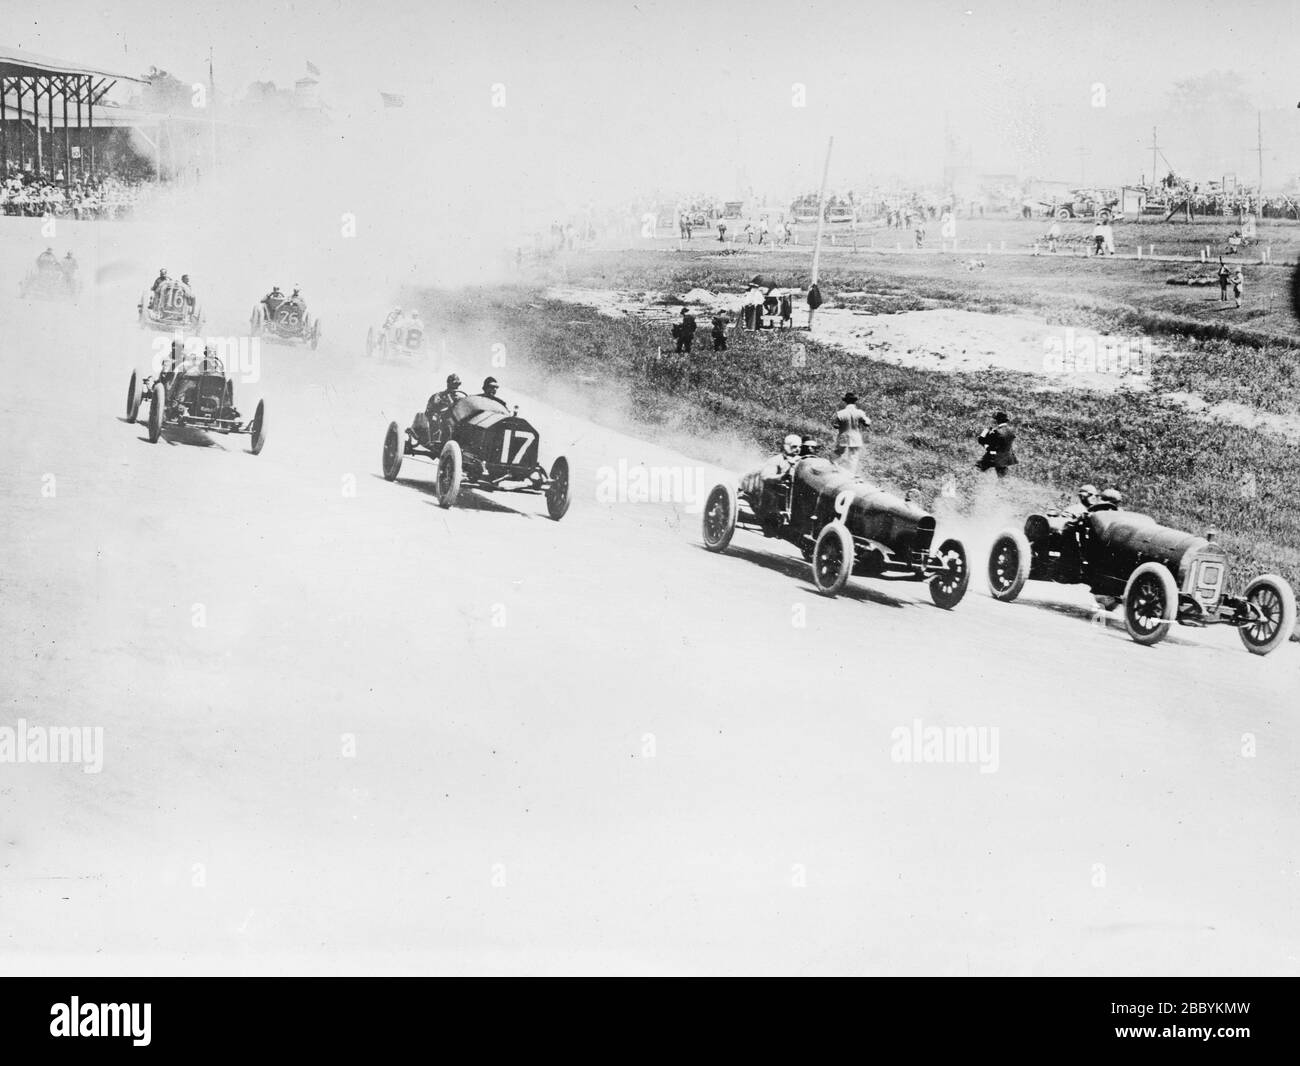 Indy 500 automobile race, in Indianapolis, Indiana May 30, 1913 Stock Photo